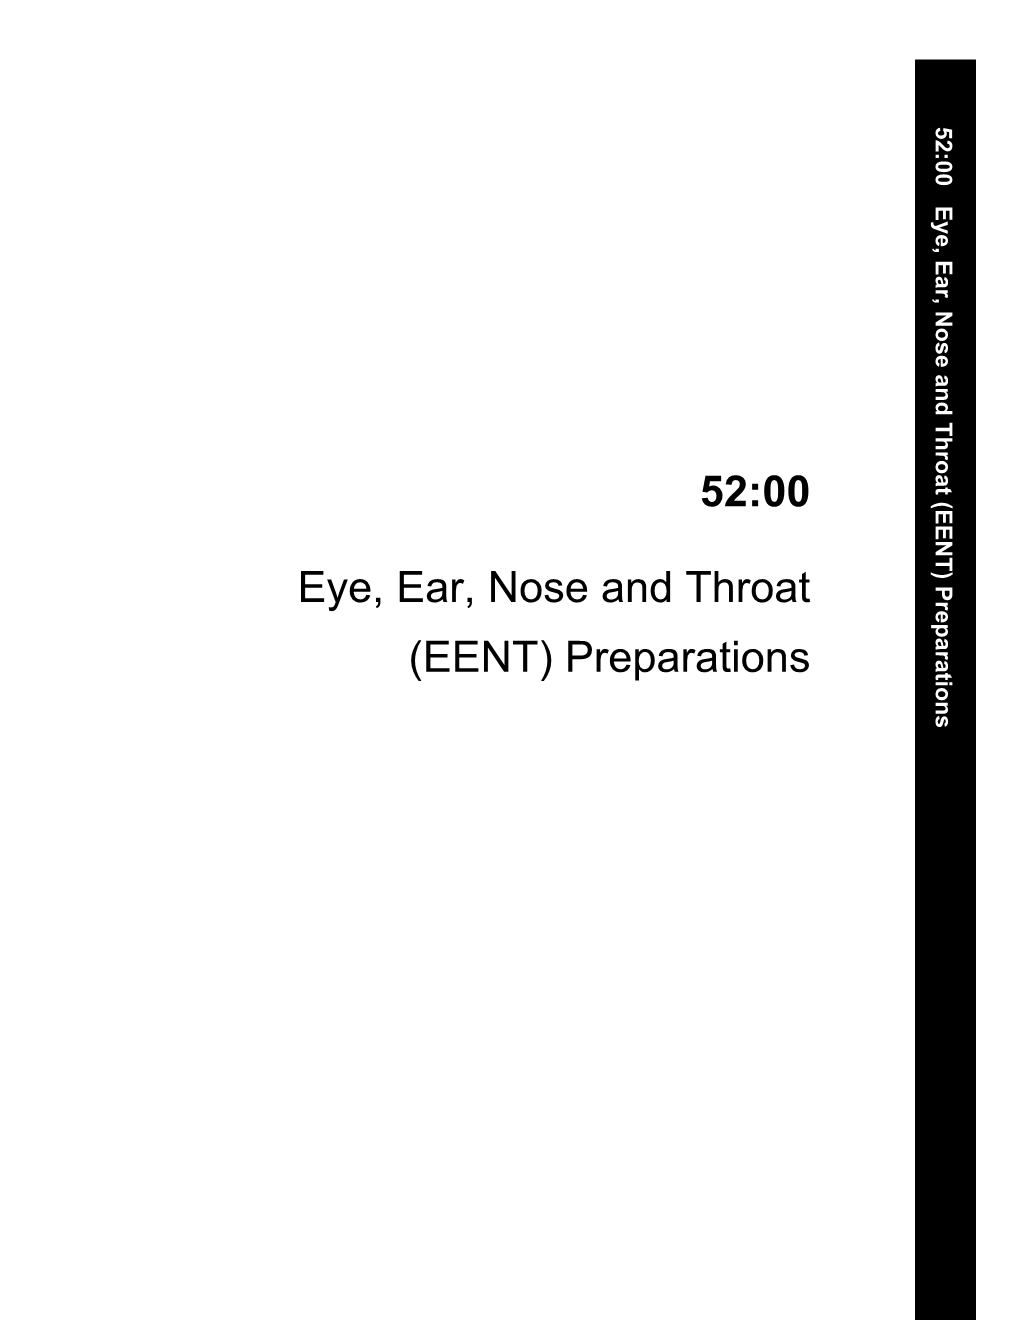 52:00 Eye, Ear, Nose and Throat (EENT) Preparations